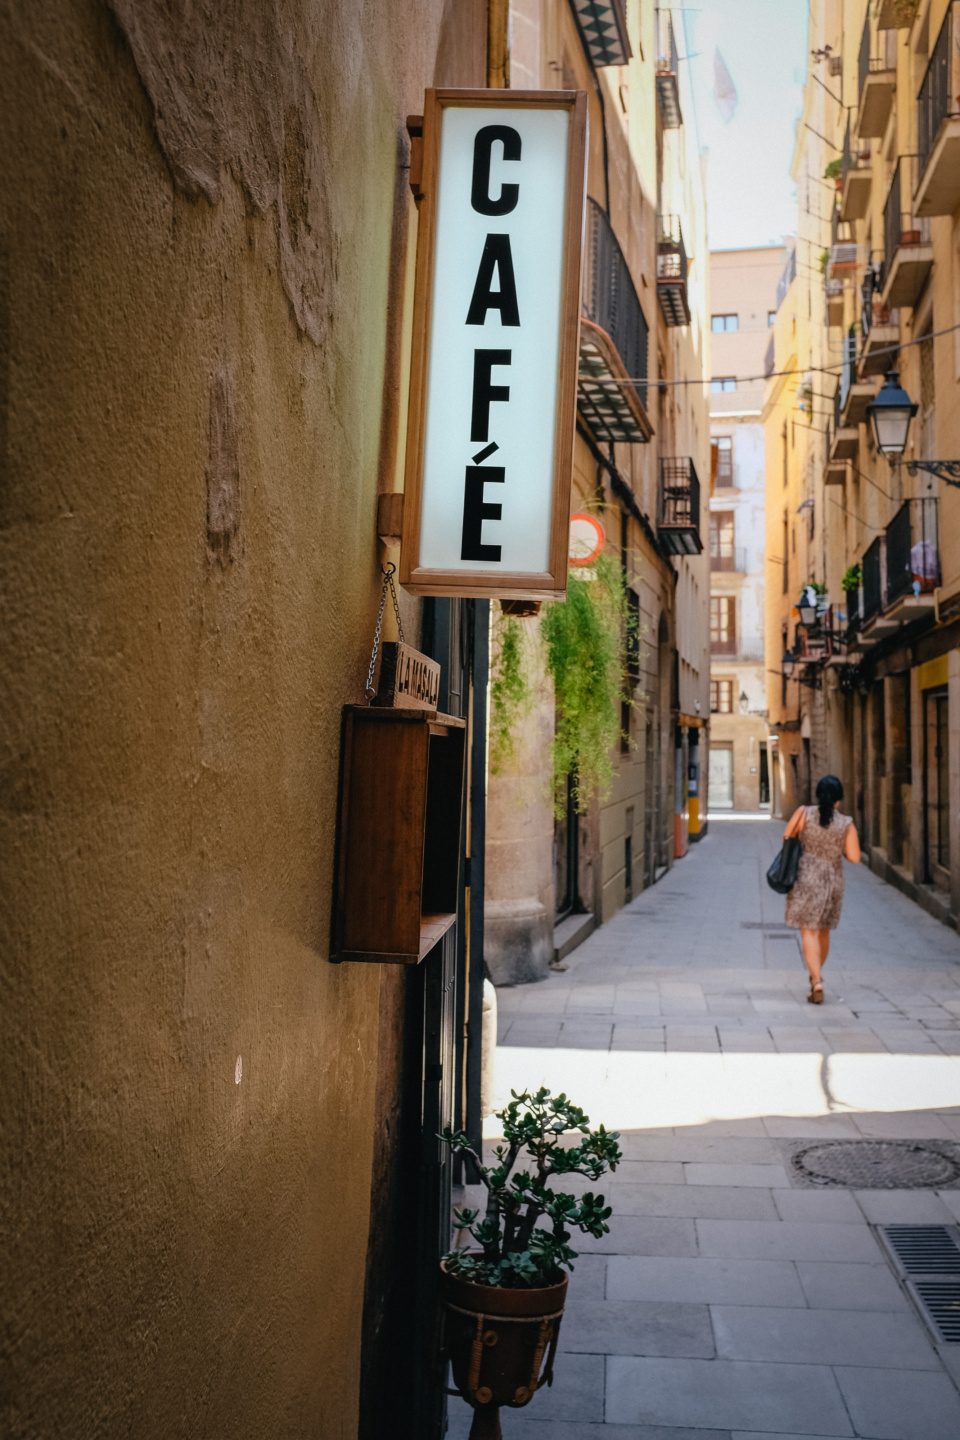 Cafe sign in an old town of Barcelona